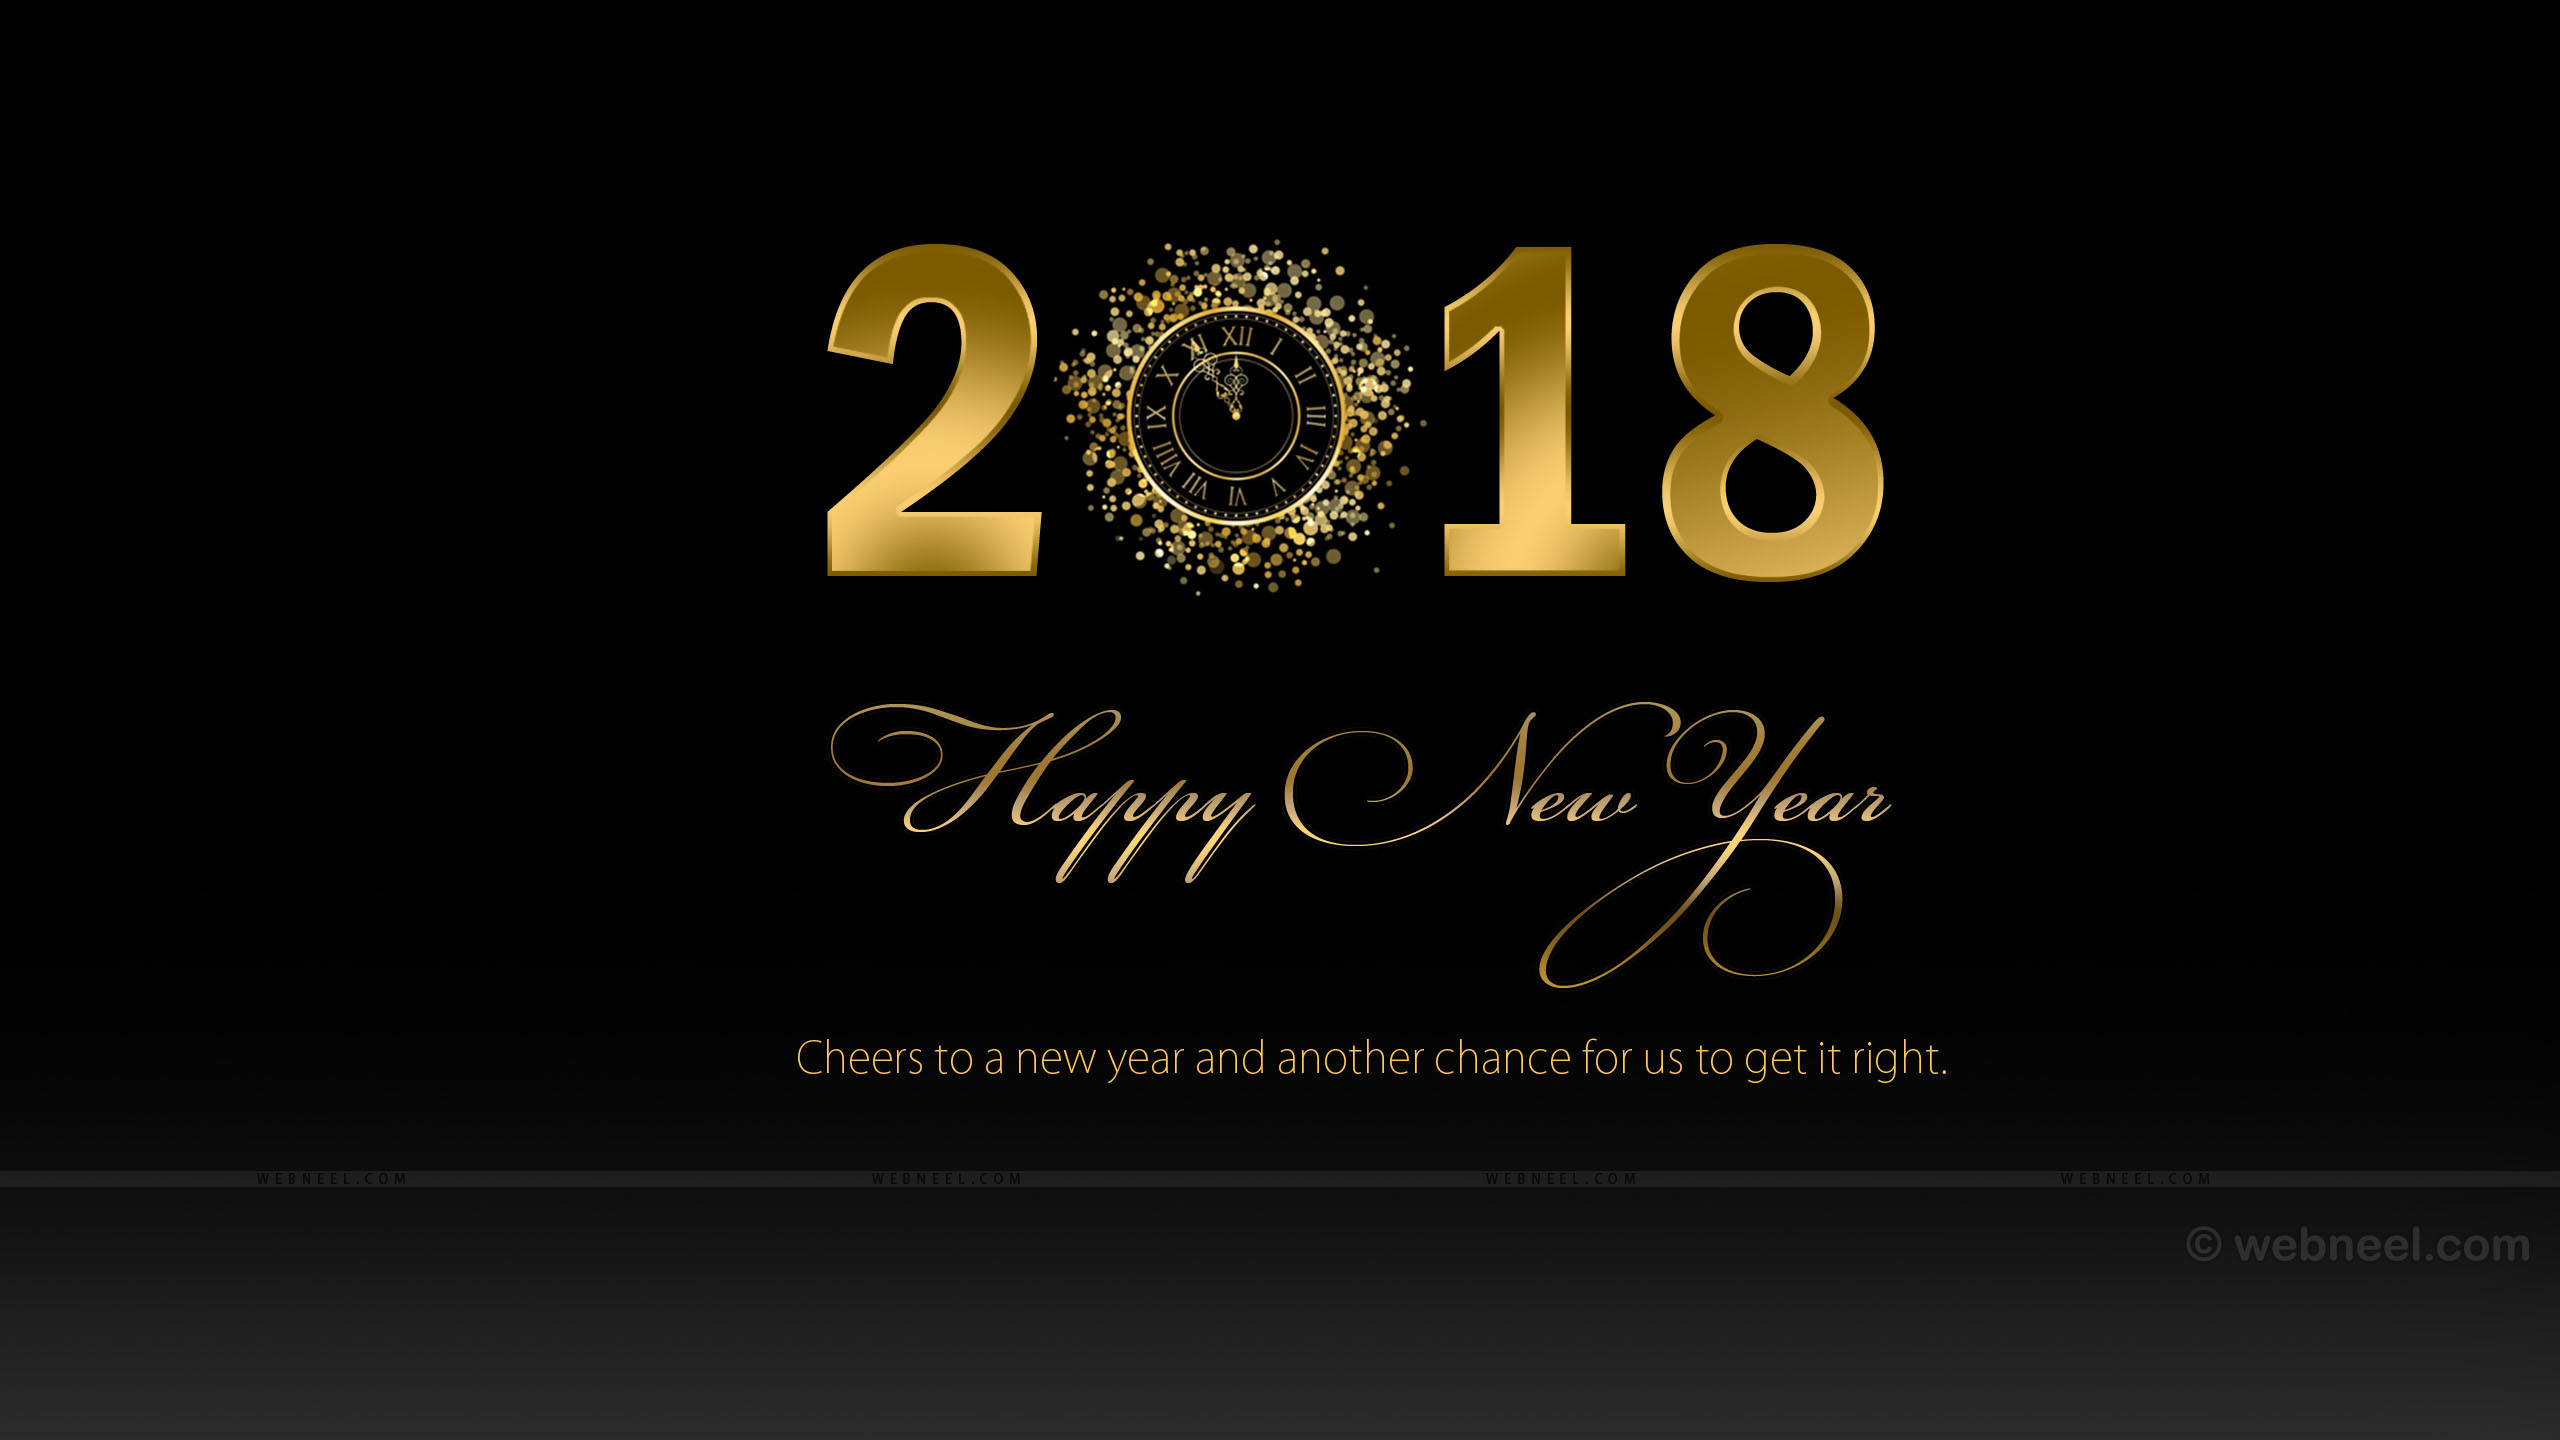 2560x1440 New Year, 2018 Wallpaper, Hd New Years Wallpapers, Happy New Year Wallpapers,  Happy New Year 2018, Santa Wallpapers HD / Desktop and Mobile Backgrounds